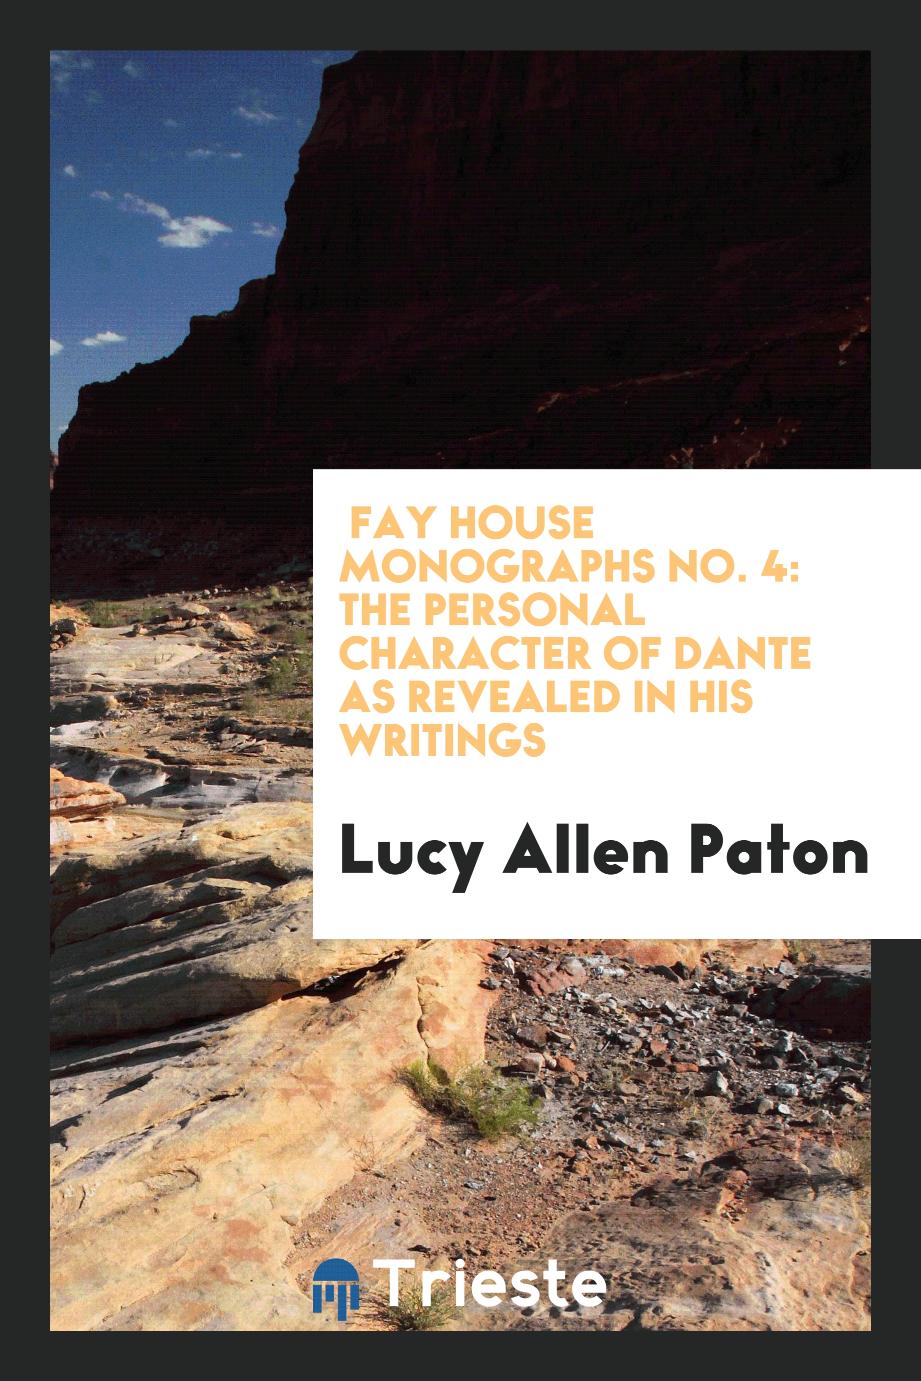 Fay house monographs No. 4: The personal character of Dante as revealed in his writings